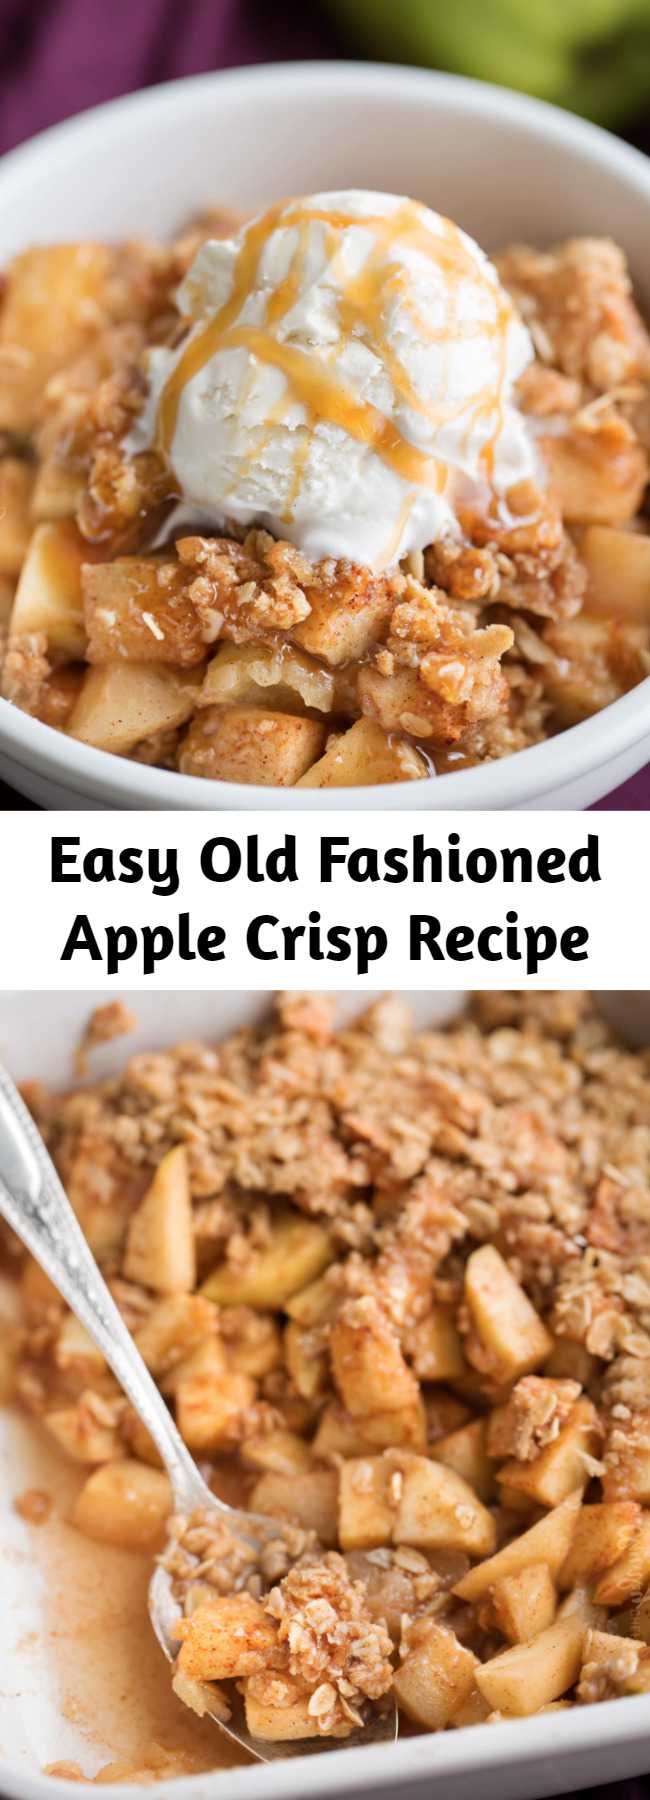 Easy Old Fashioned Apple Crisp Recipe - This easy apple crisp is made the old fashioned way like Grandma used to make, and is perfect with a scoop of vanilla ice cream and salted caramel sauce! #applecrisp #crisp #apples #fall #baking #dessert #recipe